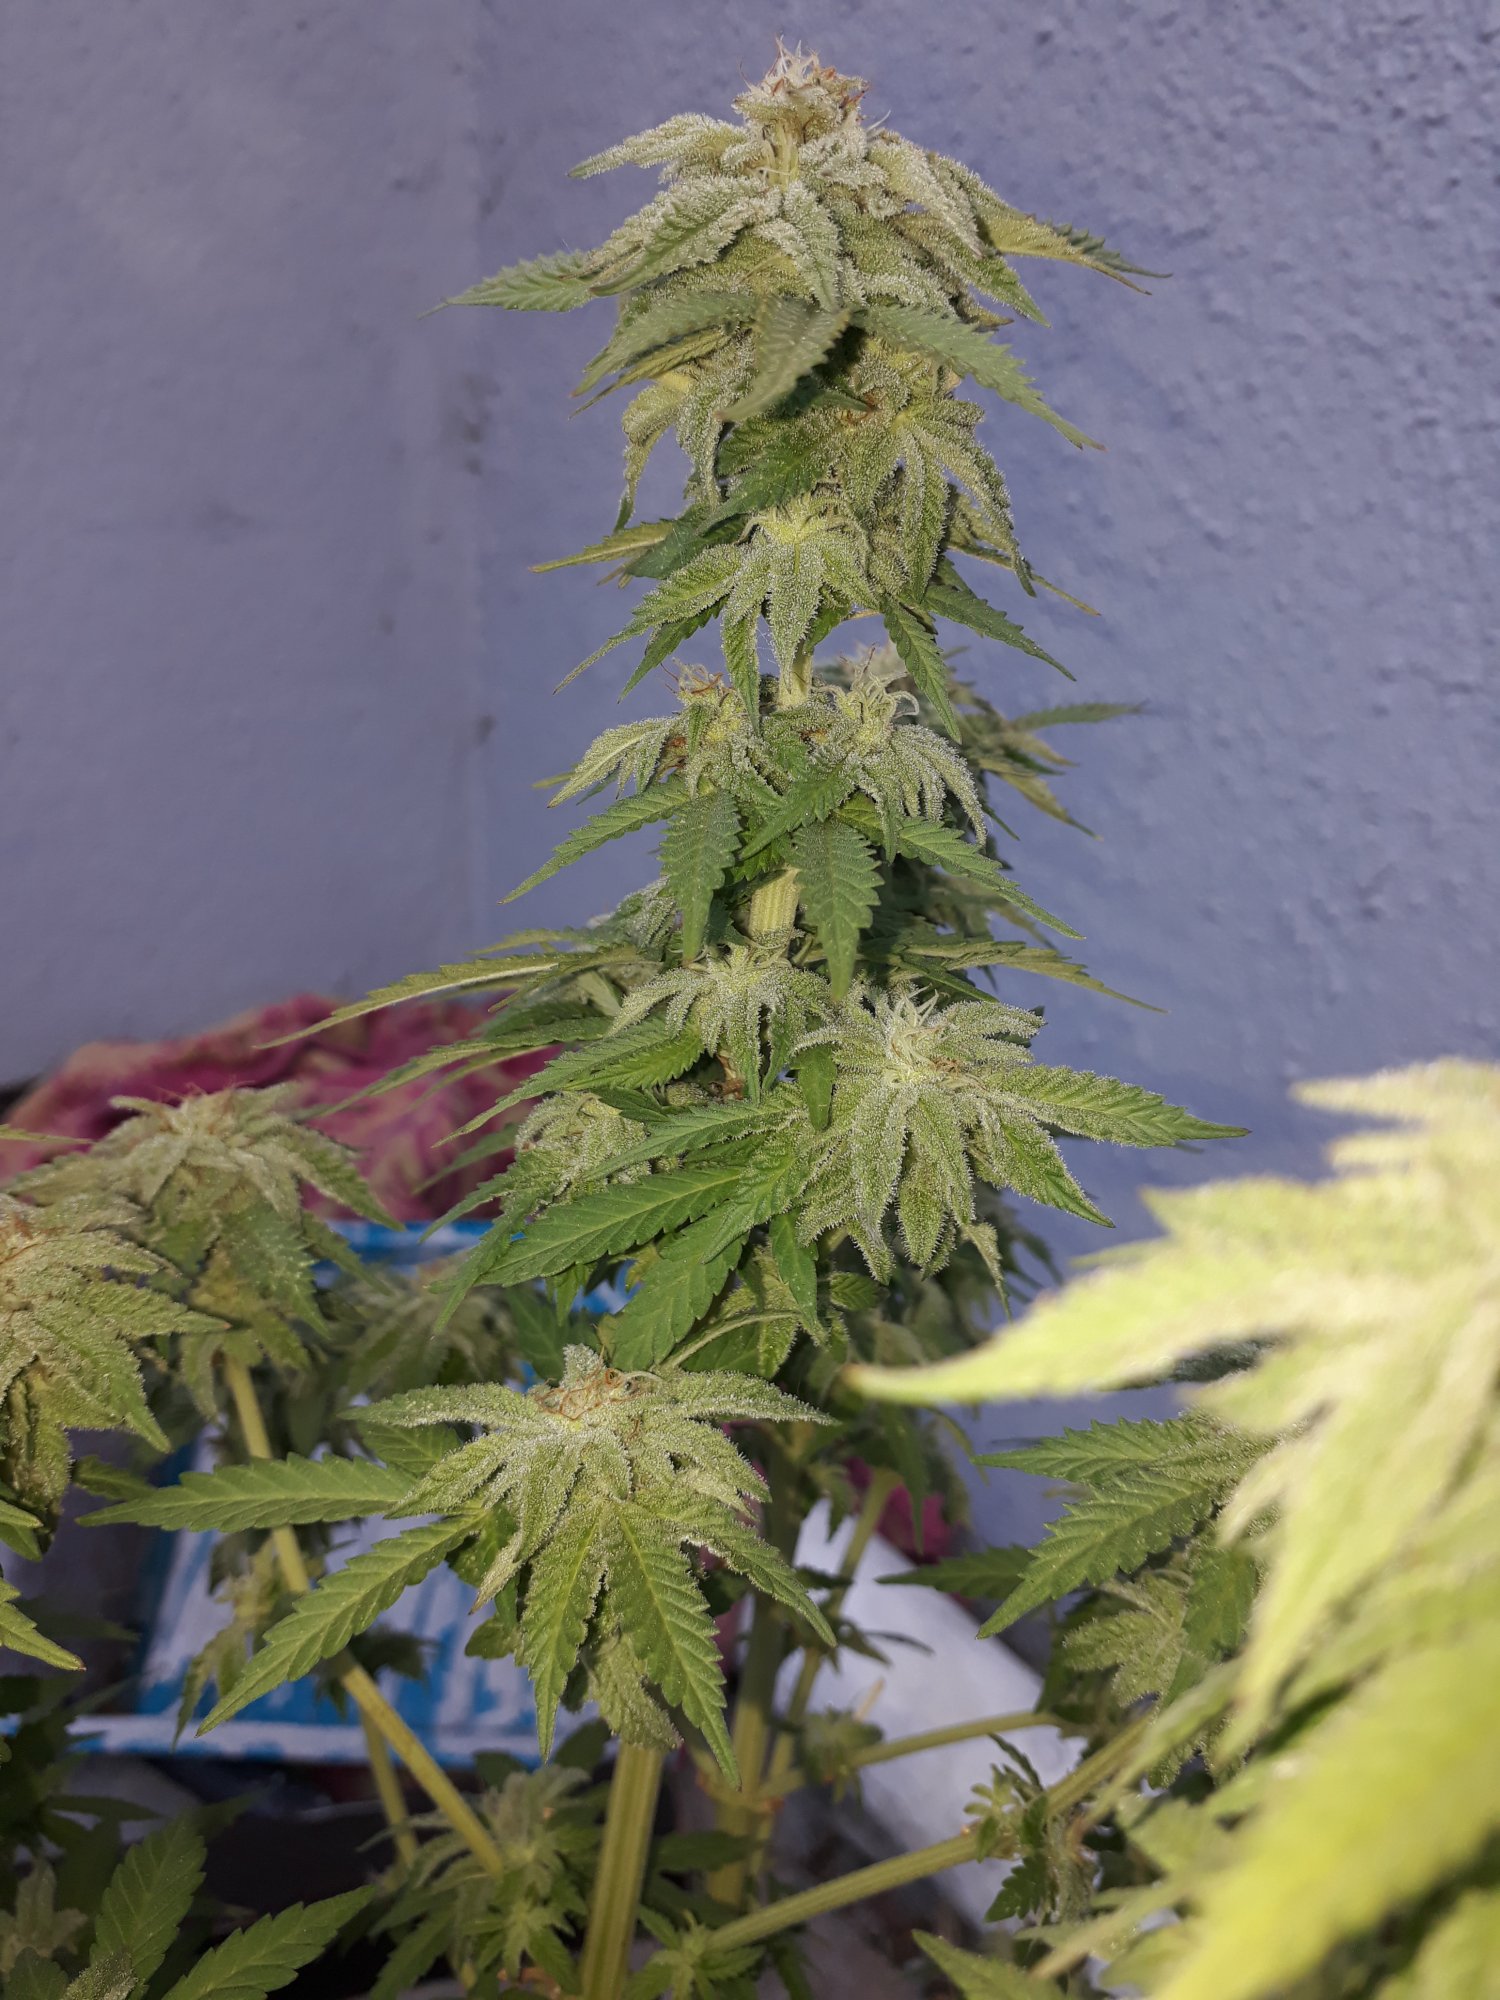 Plant looks almost ready 4 weeks into flower 3